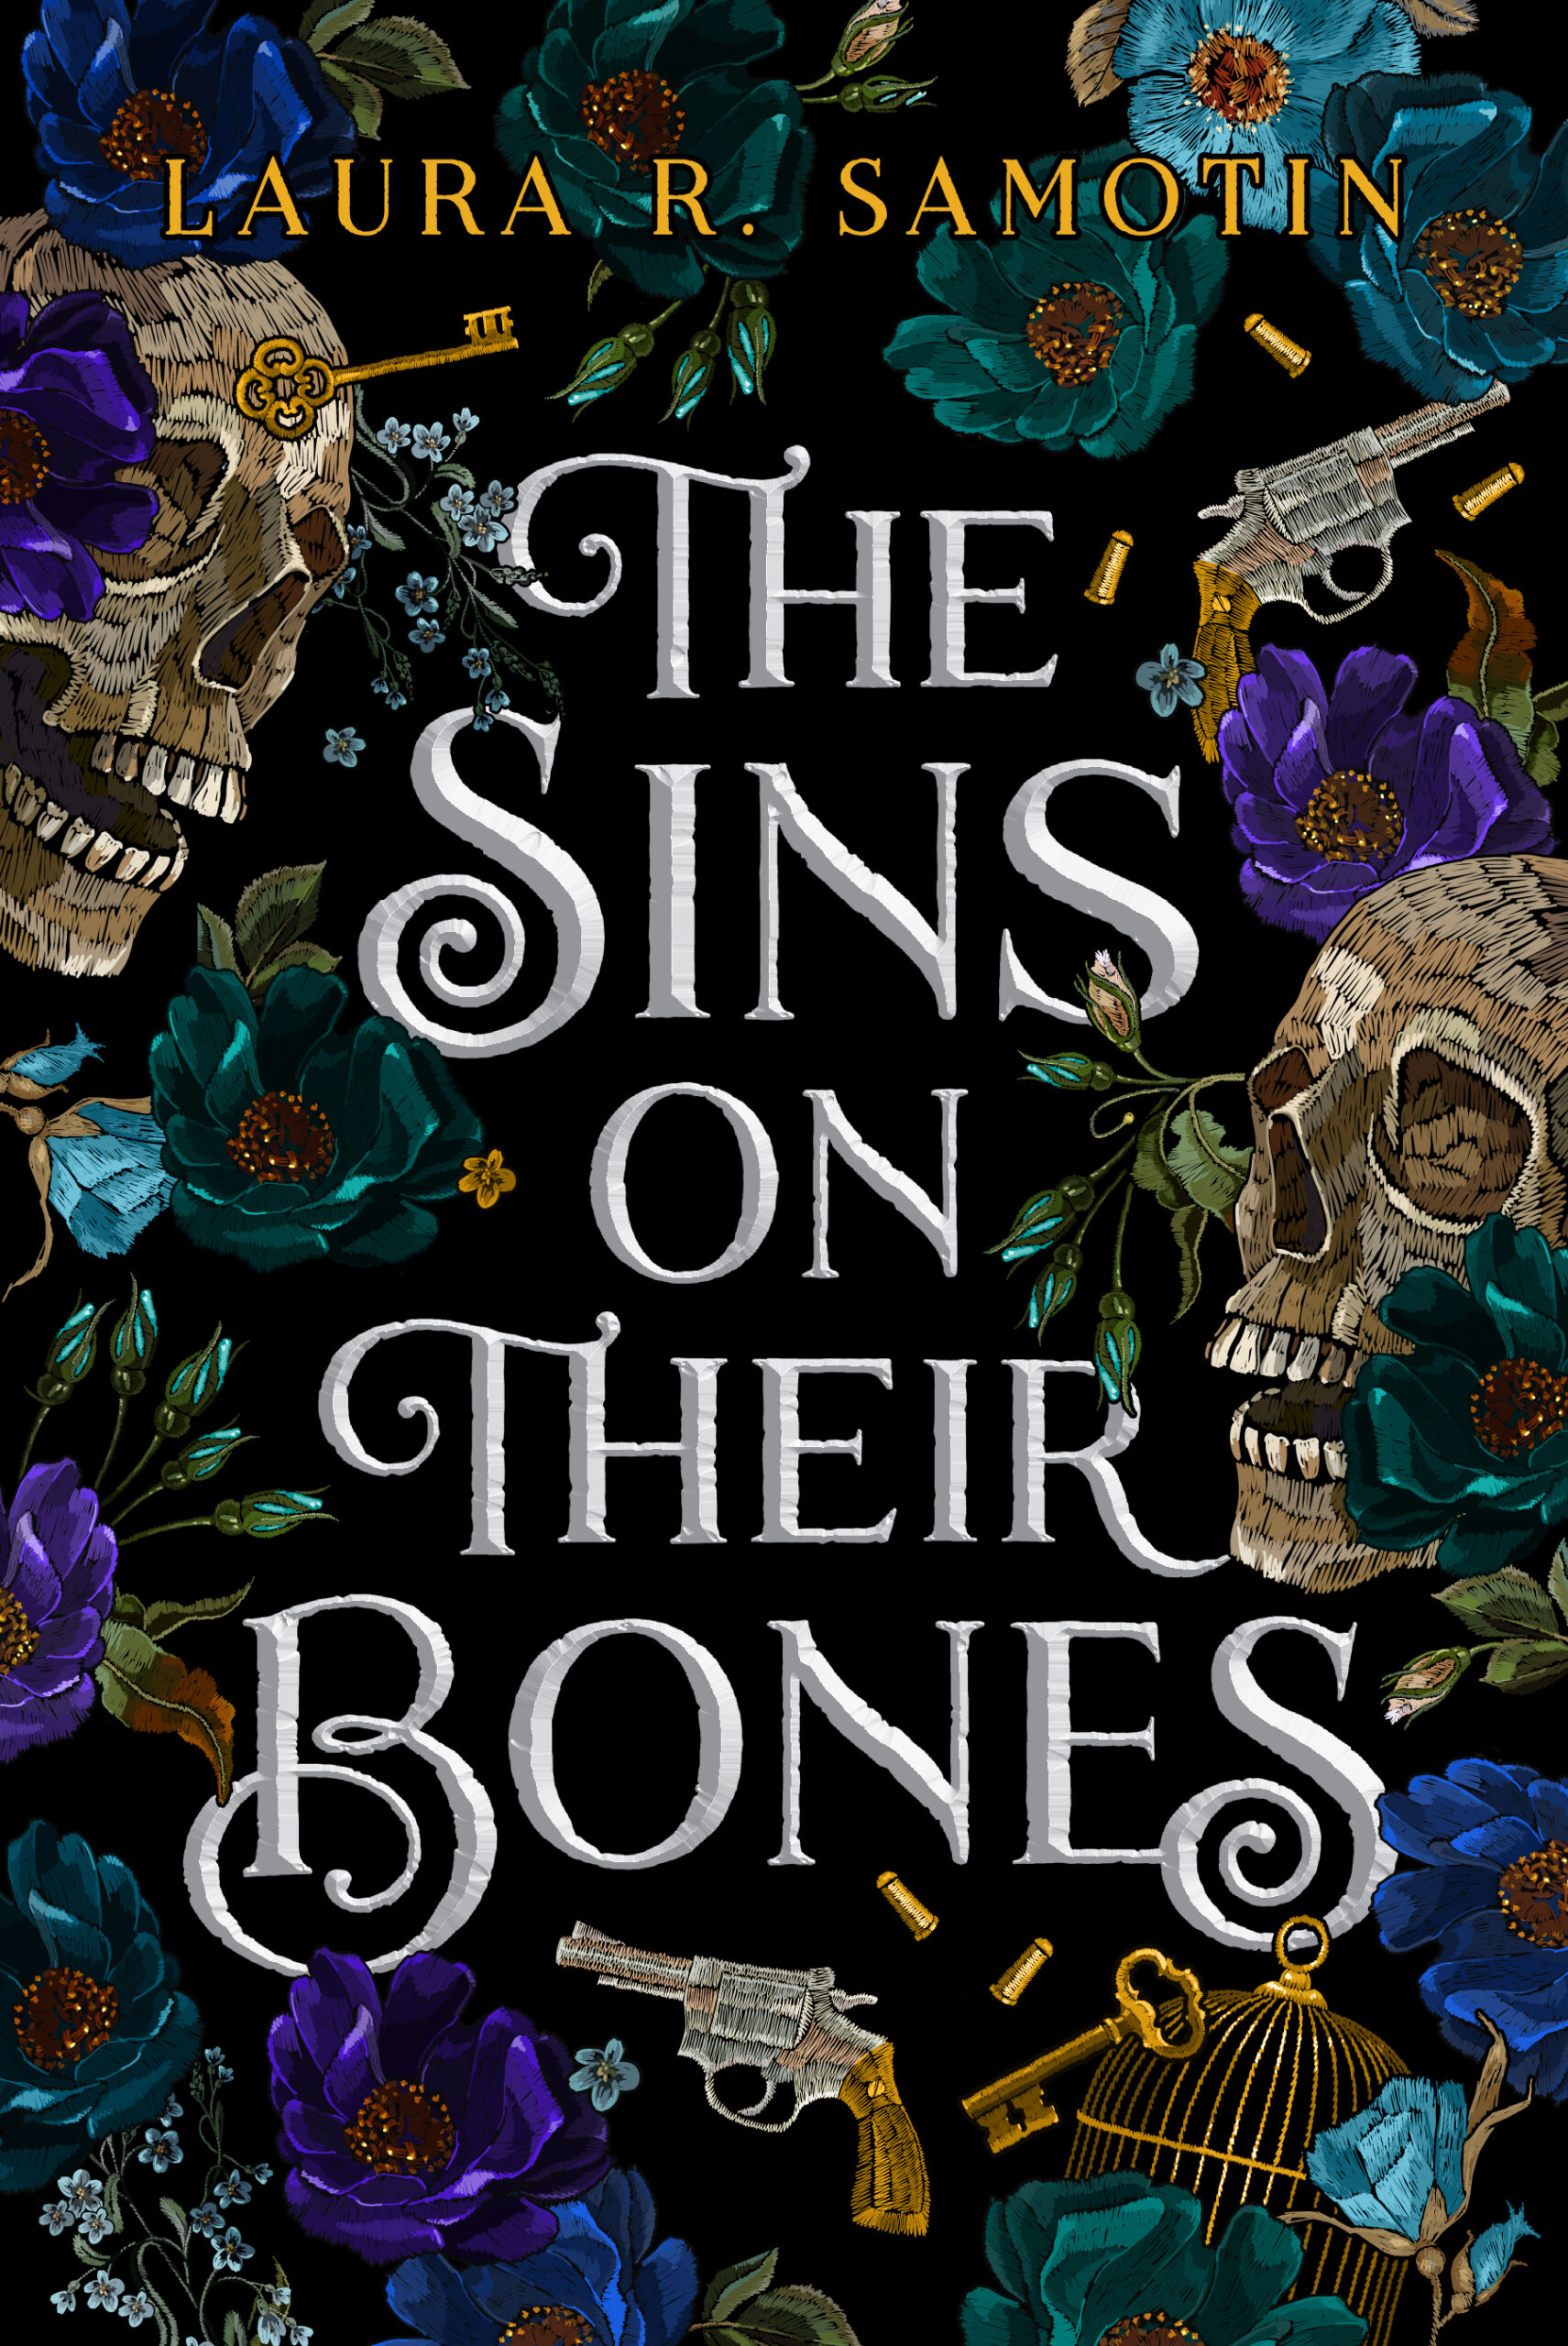 Cover art for The Sins on Their Bones by Laura R. Samotin.